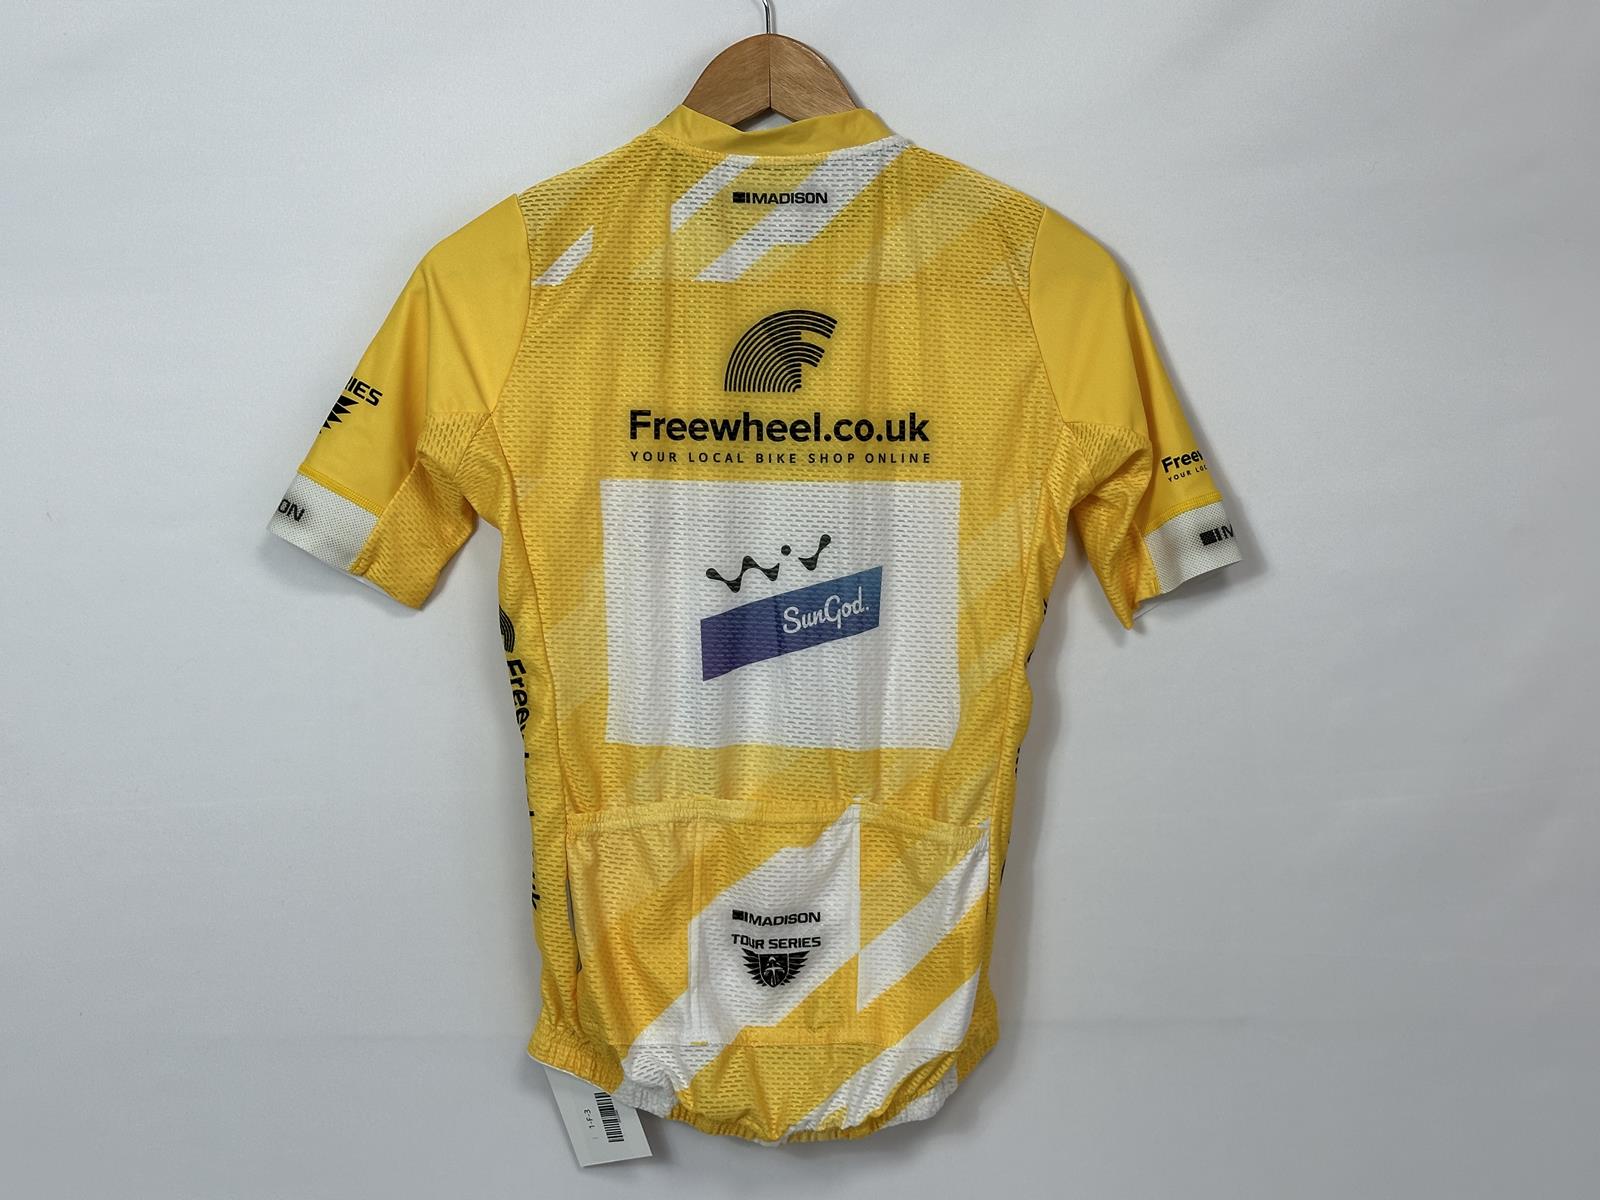 Team SunGod - S/S Team Jersey by Madison